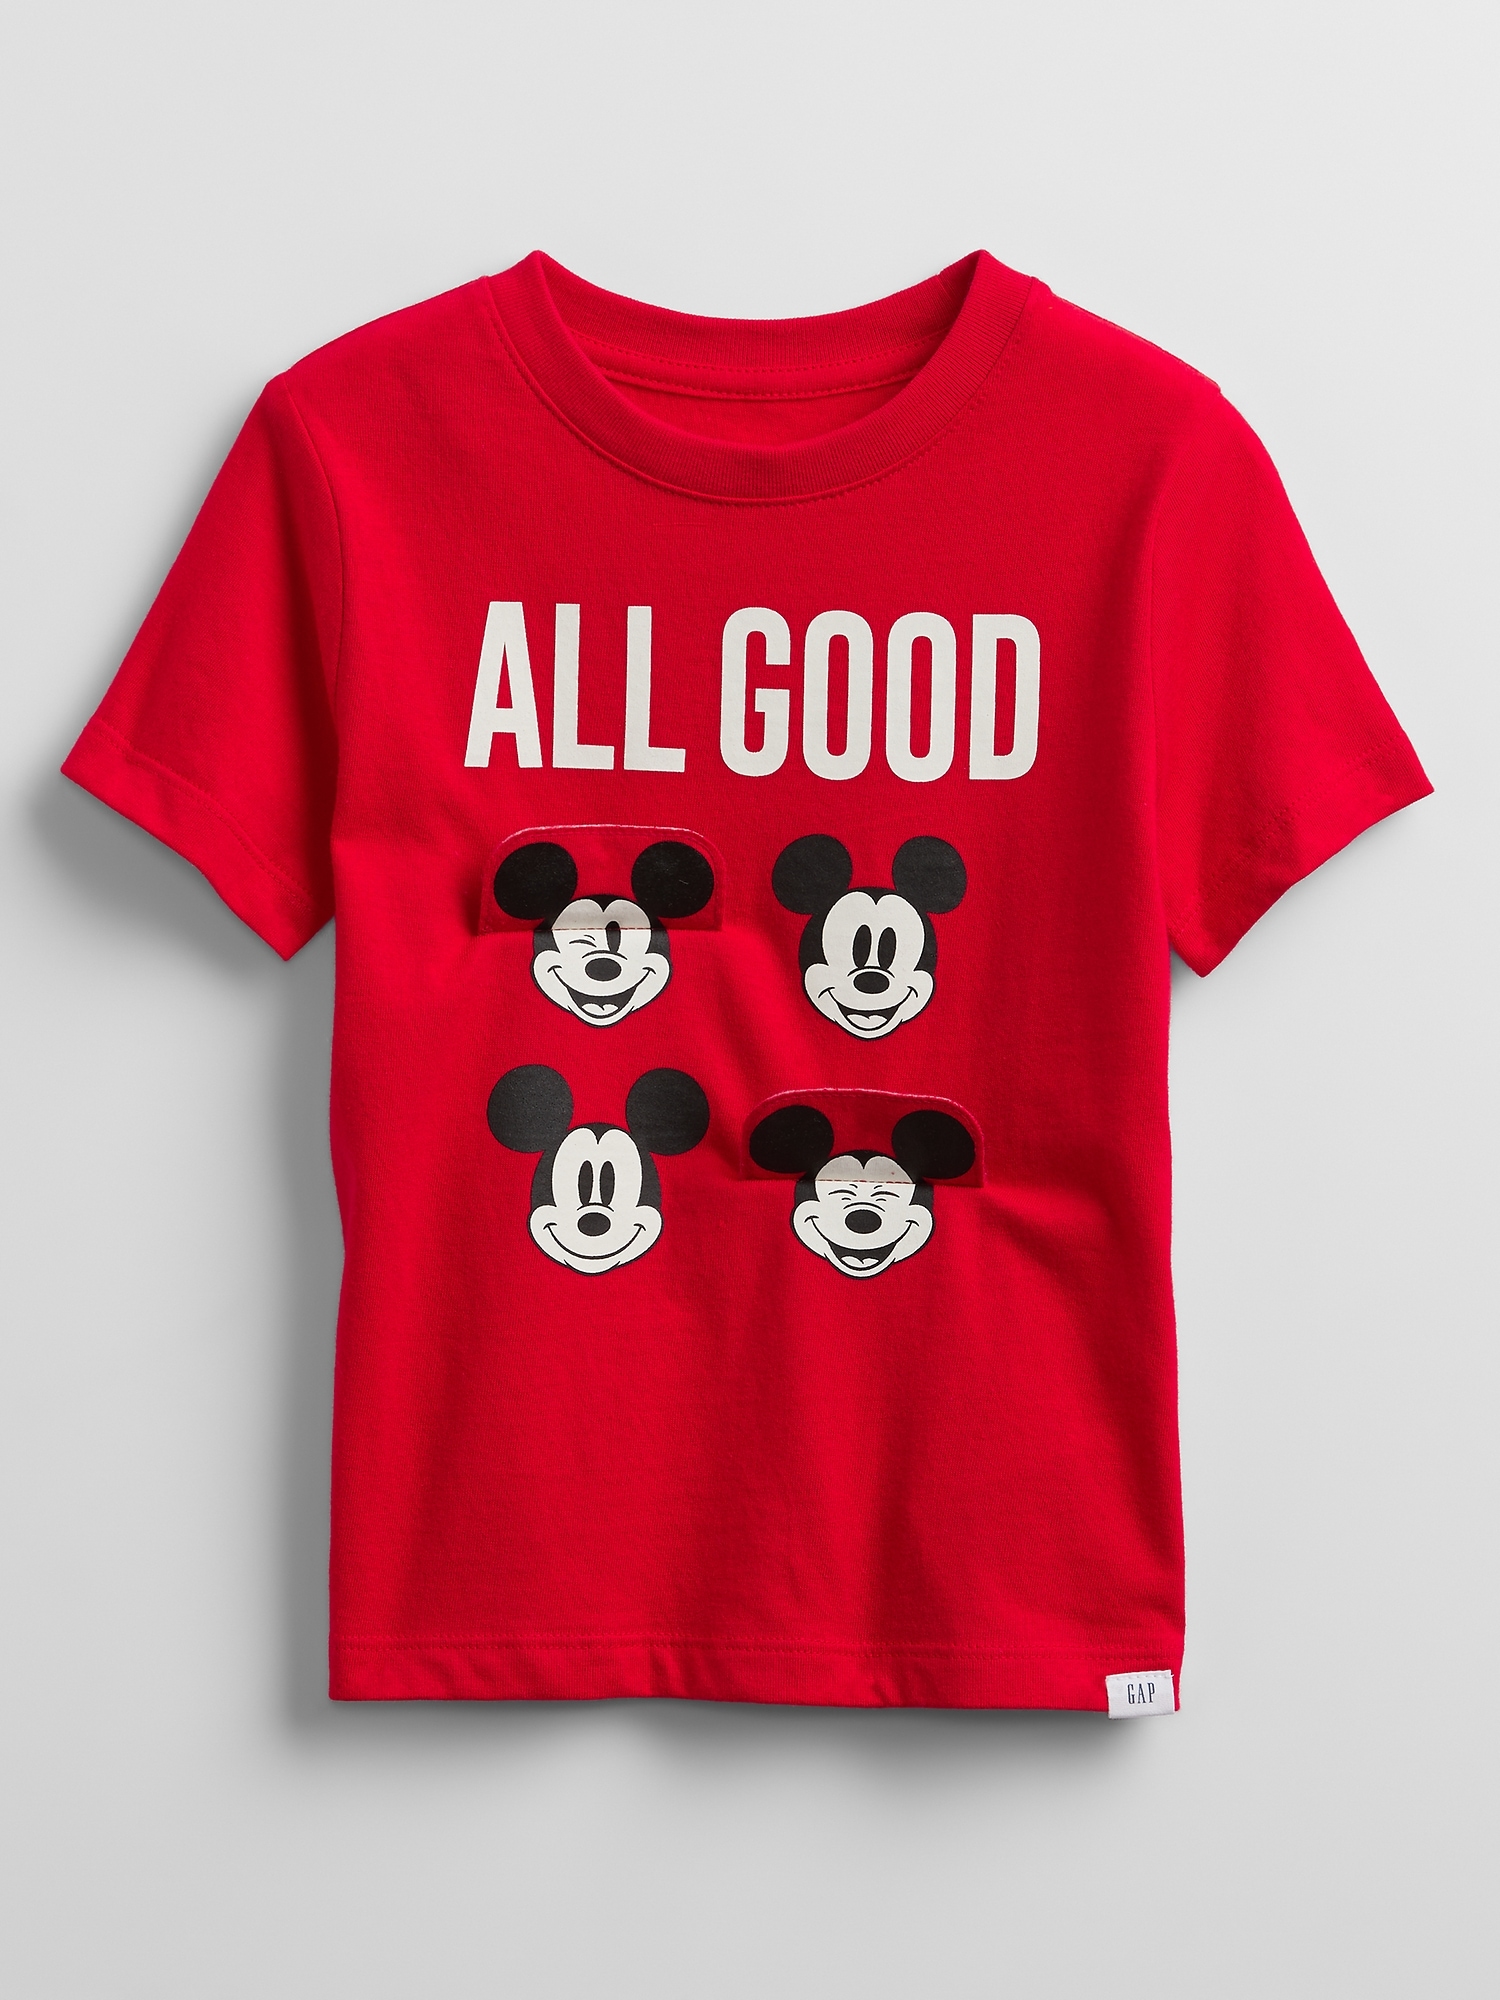 Old Navy Boys 12-18 18-24 MONTHS 2T 3T 4T 5T Mickey Mouse Tee Shirt Top Disney 